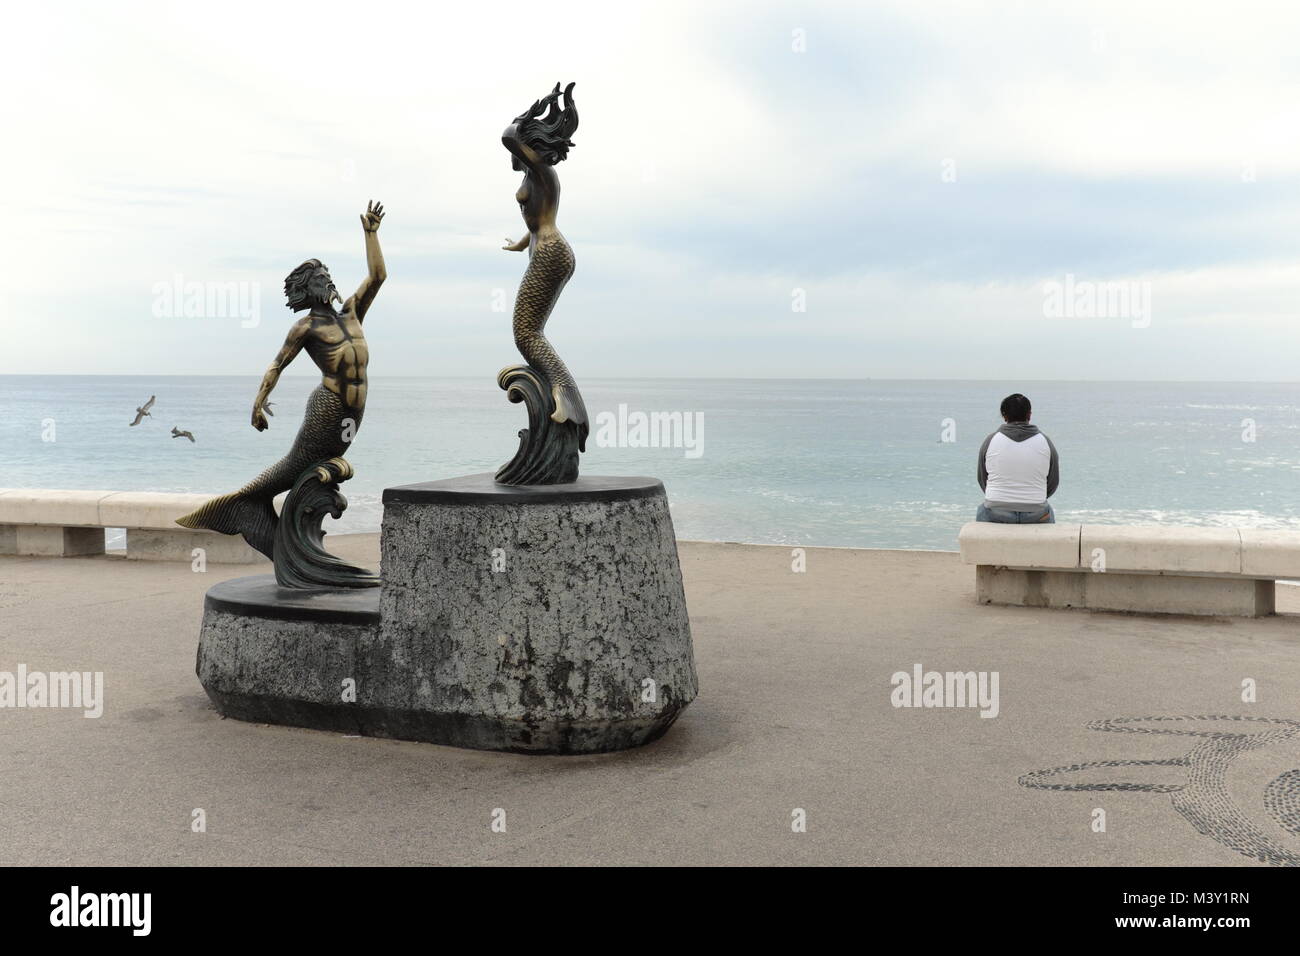 A lone woman sits on the Puerto Vallarta seaside malecon with seagulls flying nearby and a statue of Triton merman and Nereida mermaid behind her. Stock Photo